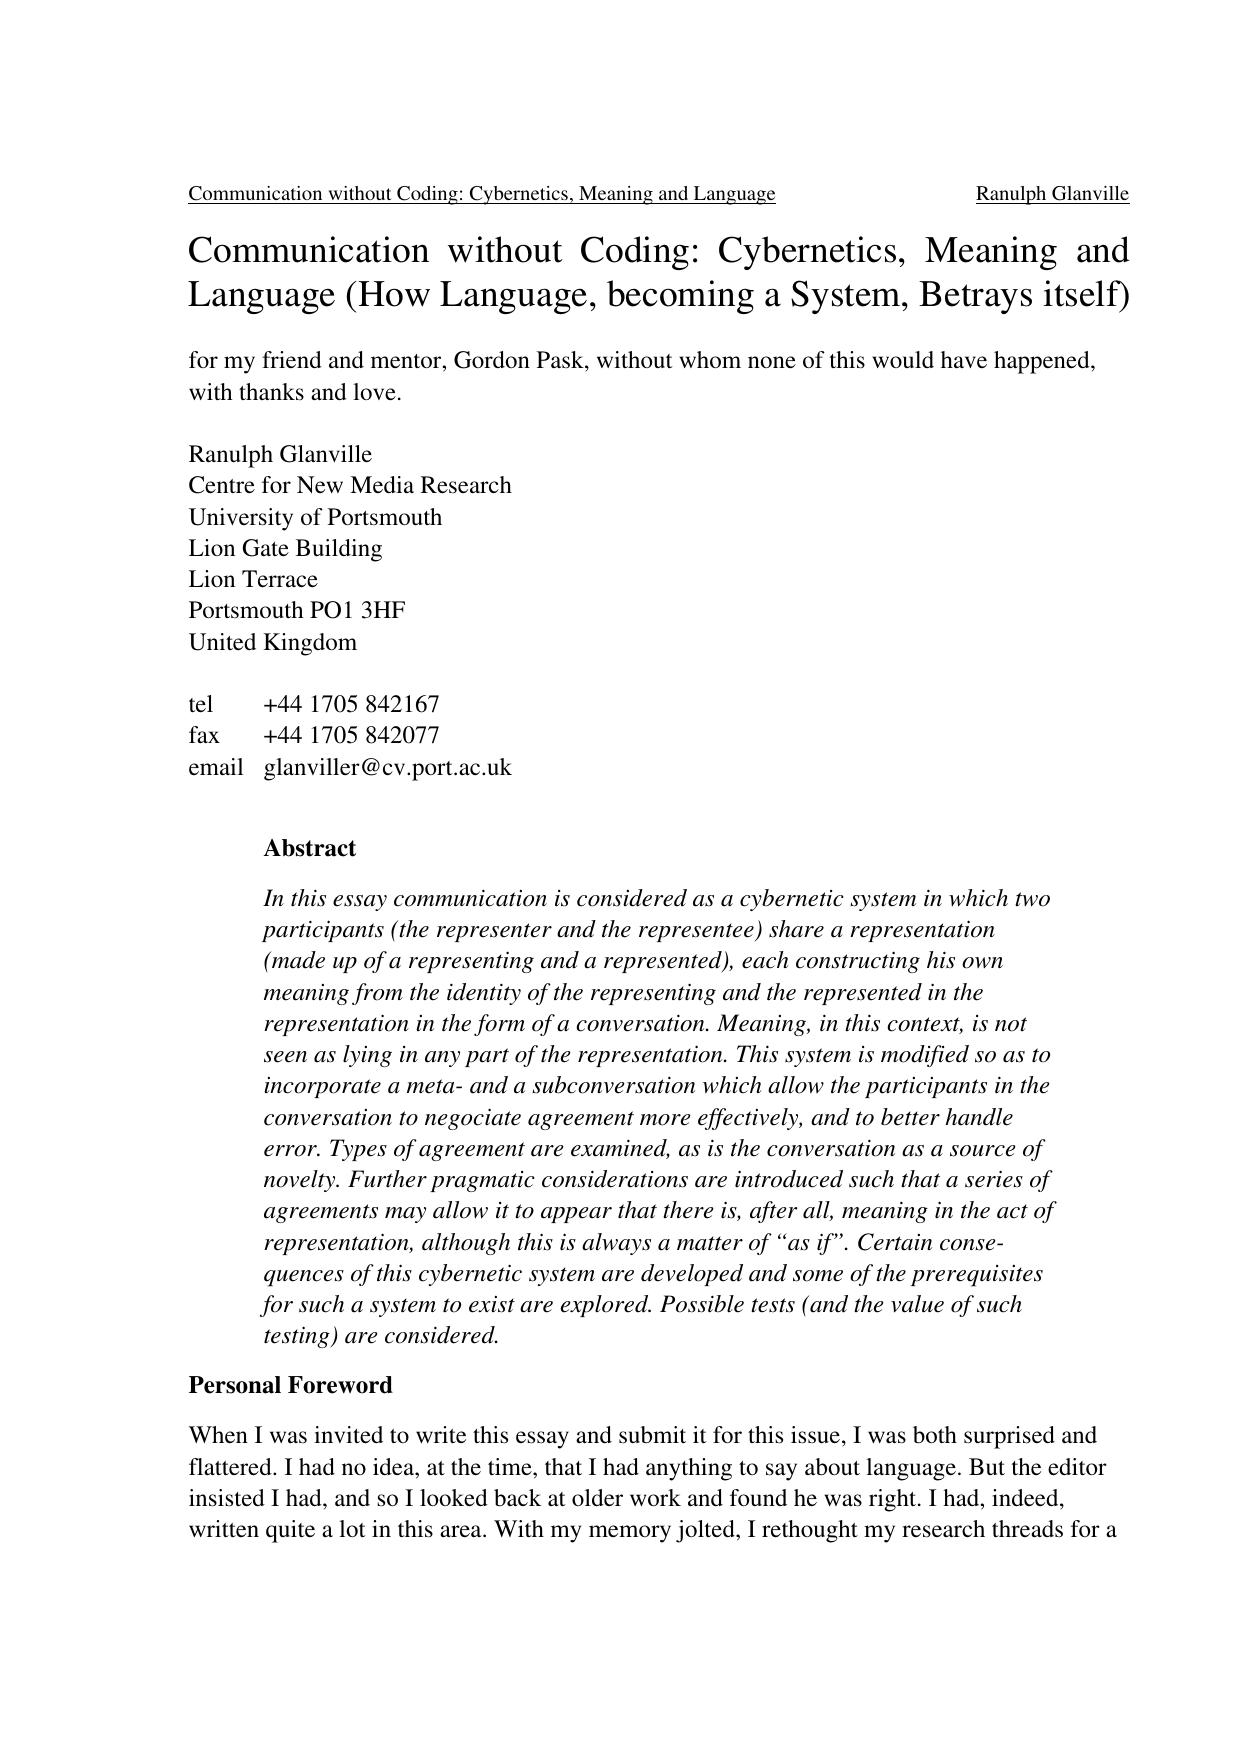 Communication without Coding: Cybernetics, Meaning and Language (How Language, becoming a System, Betrays itself) - Abstract